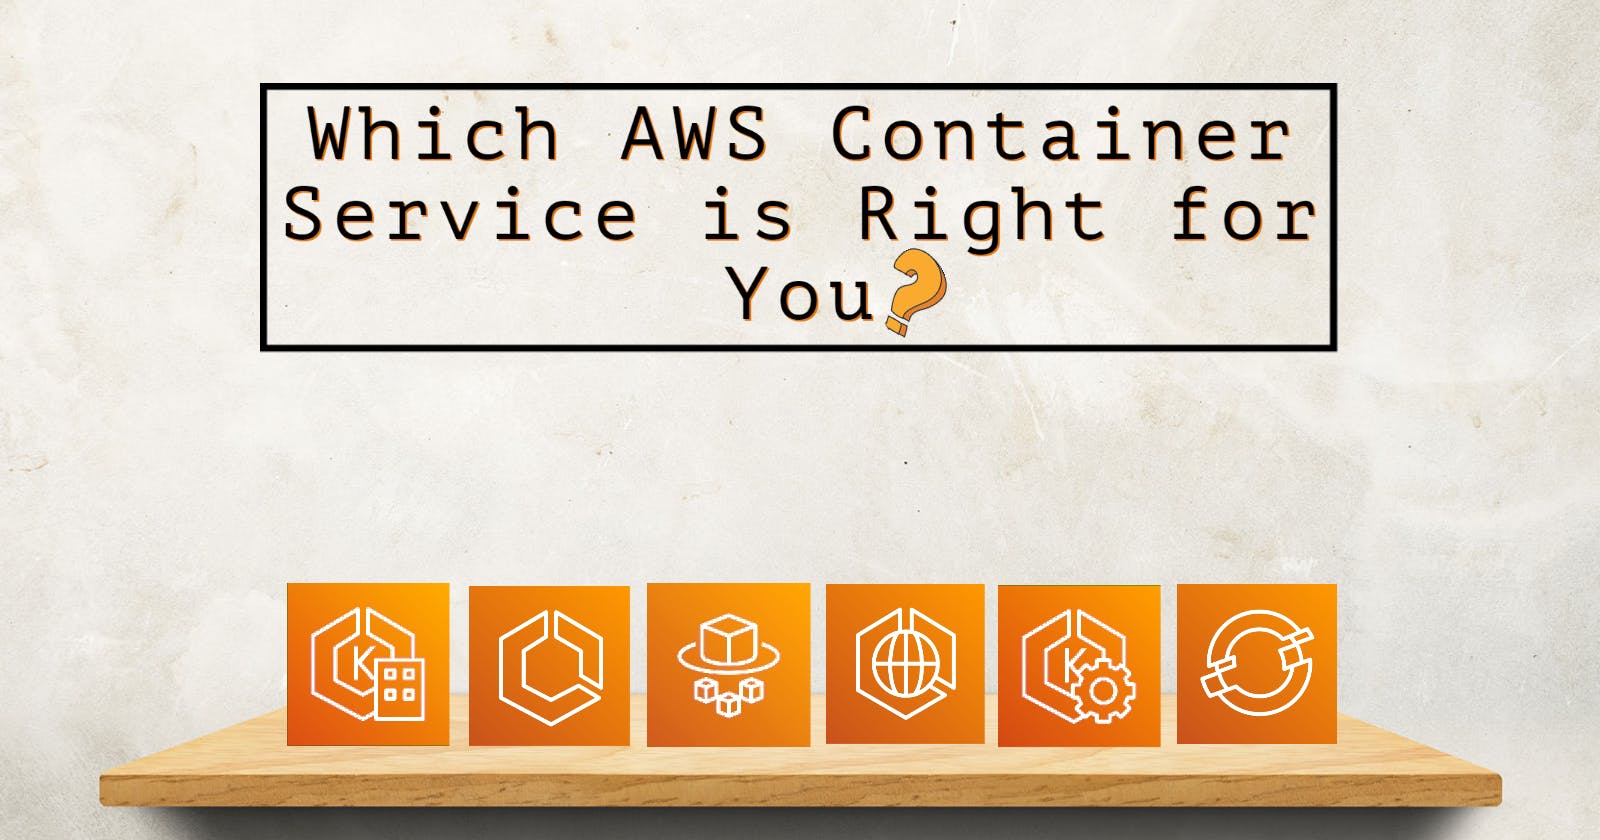 AWS Container Services: Which One is Right For You?